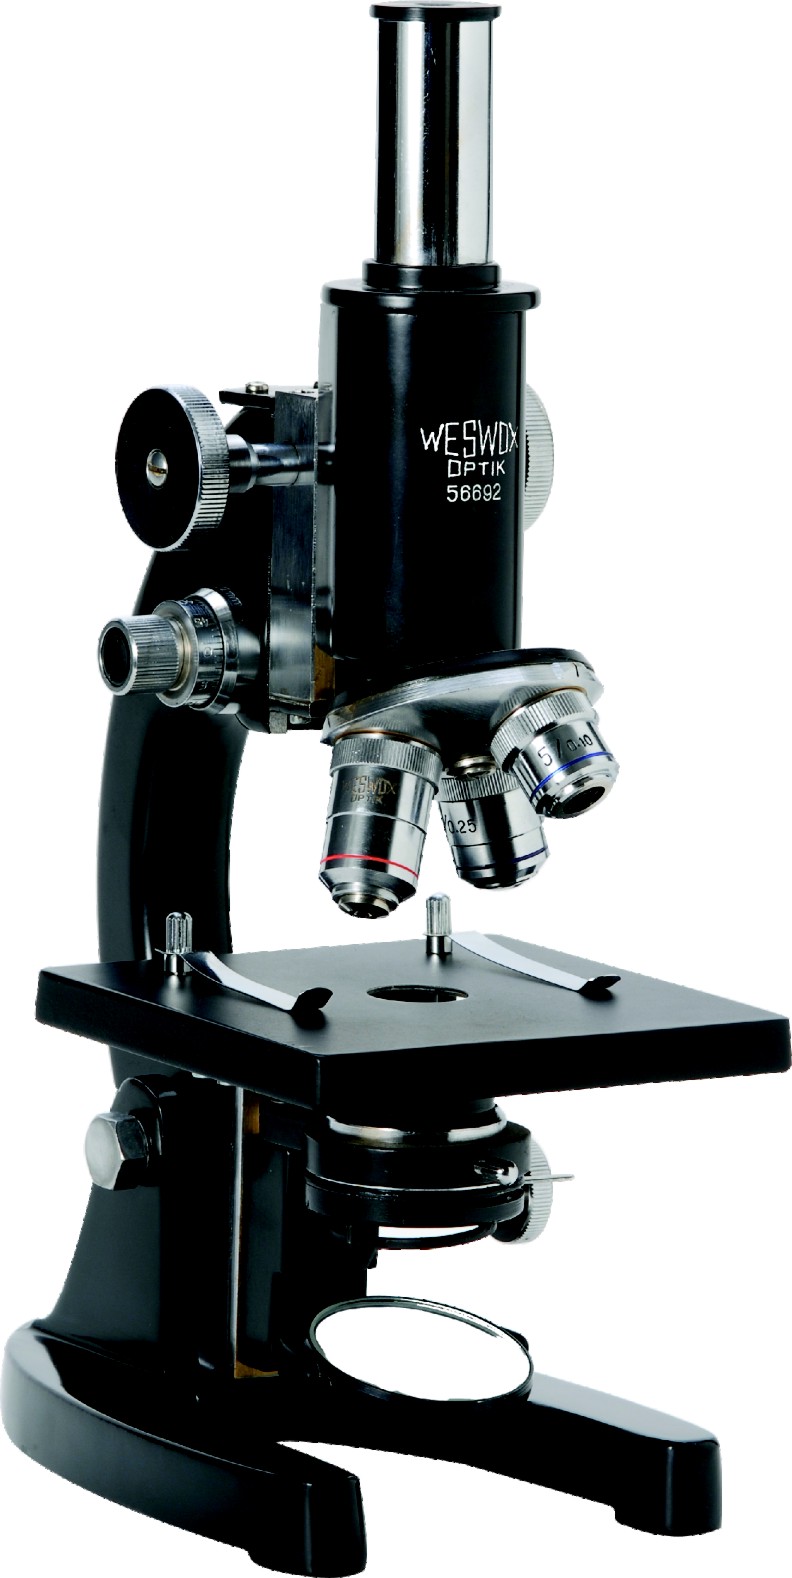 WESWOX Advance Student Microscope, Color : black